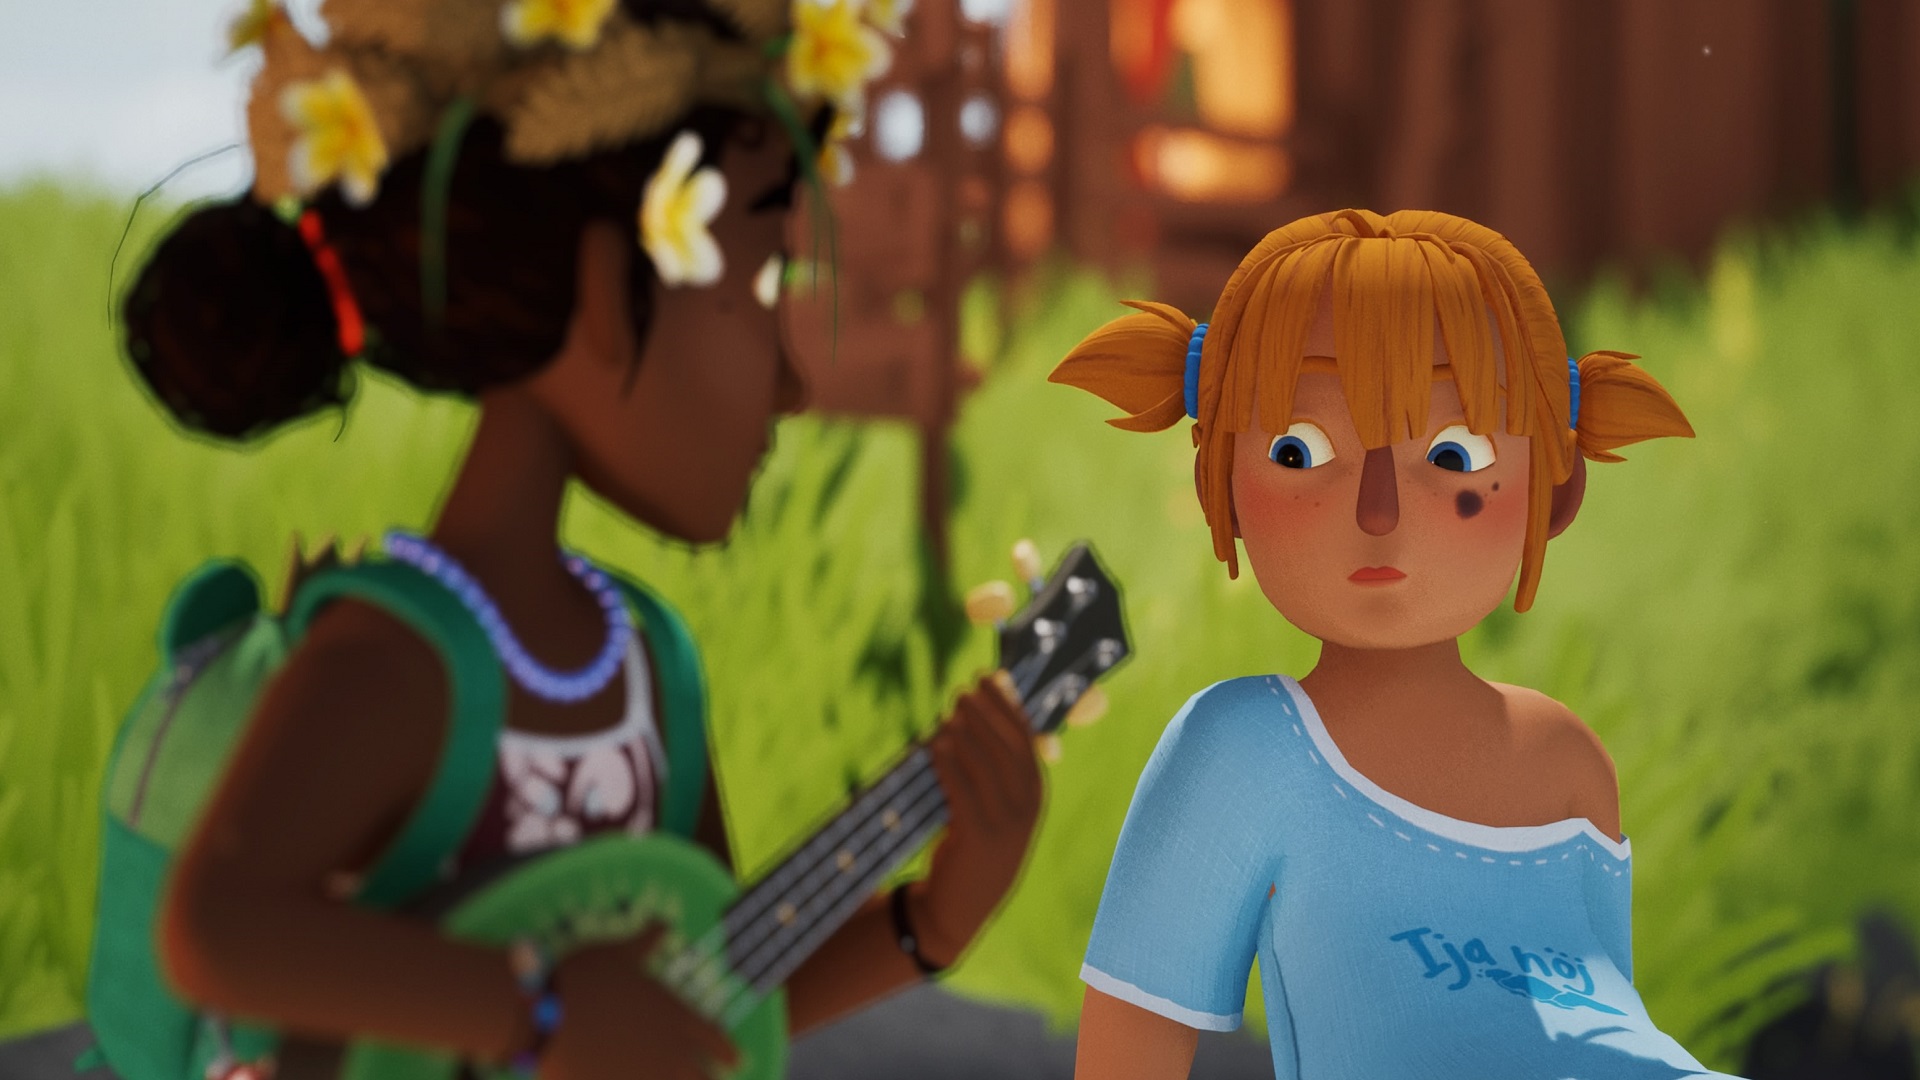 Tchia overview: “Awaceb delivers a pleasant, creative journey”